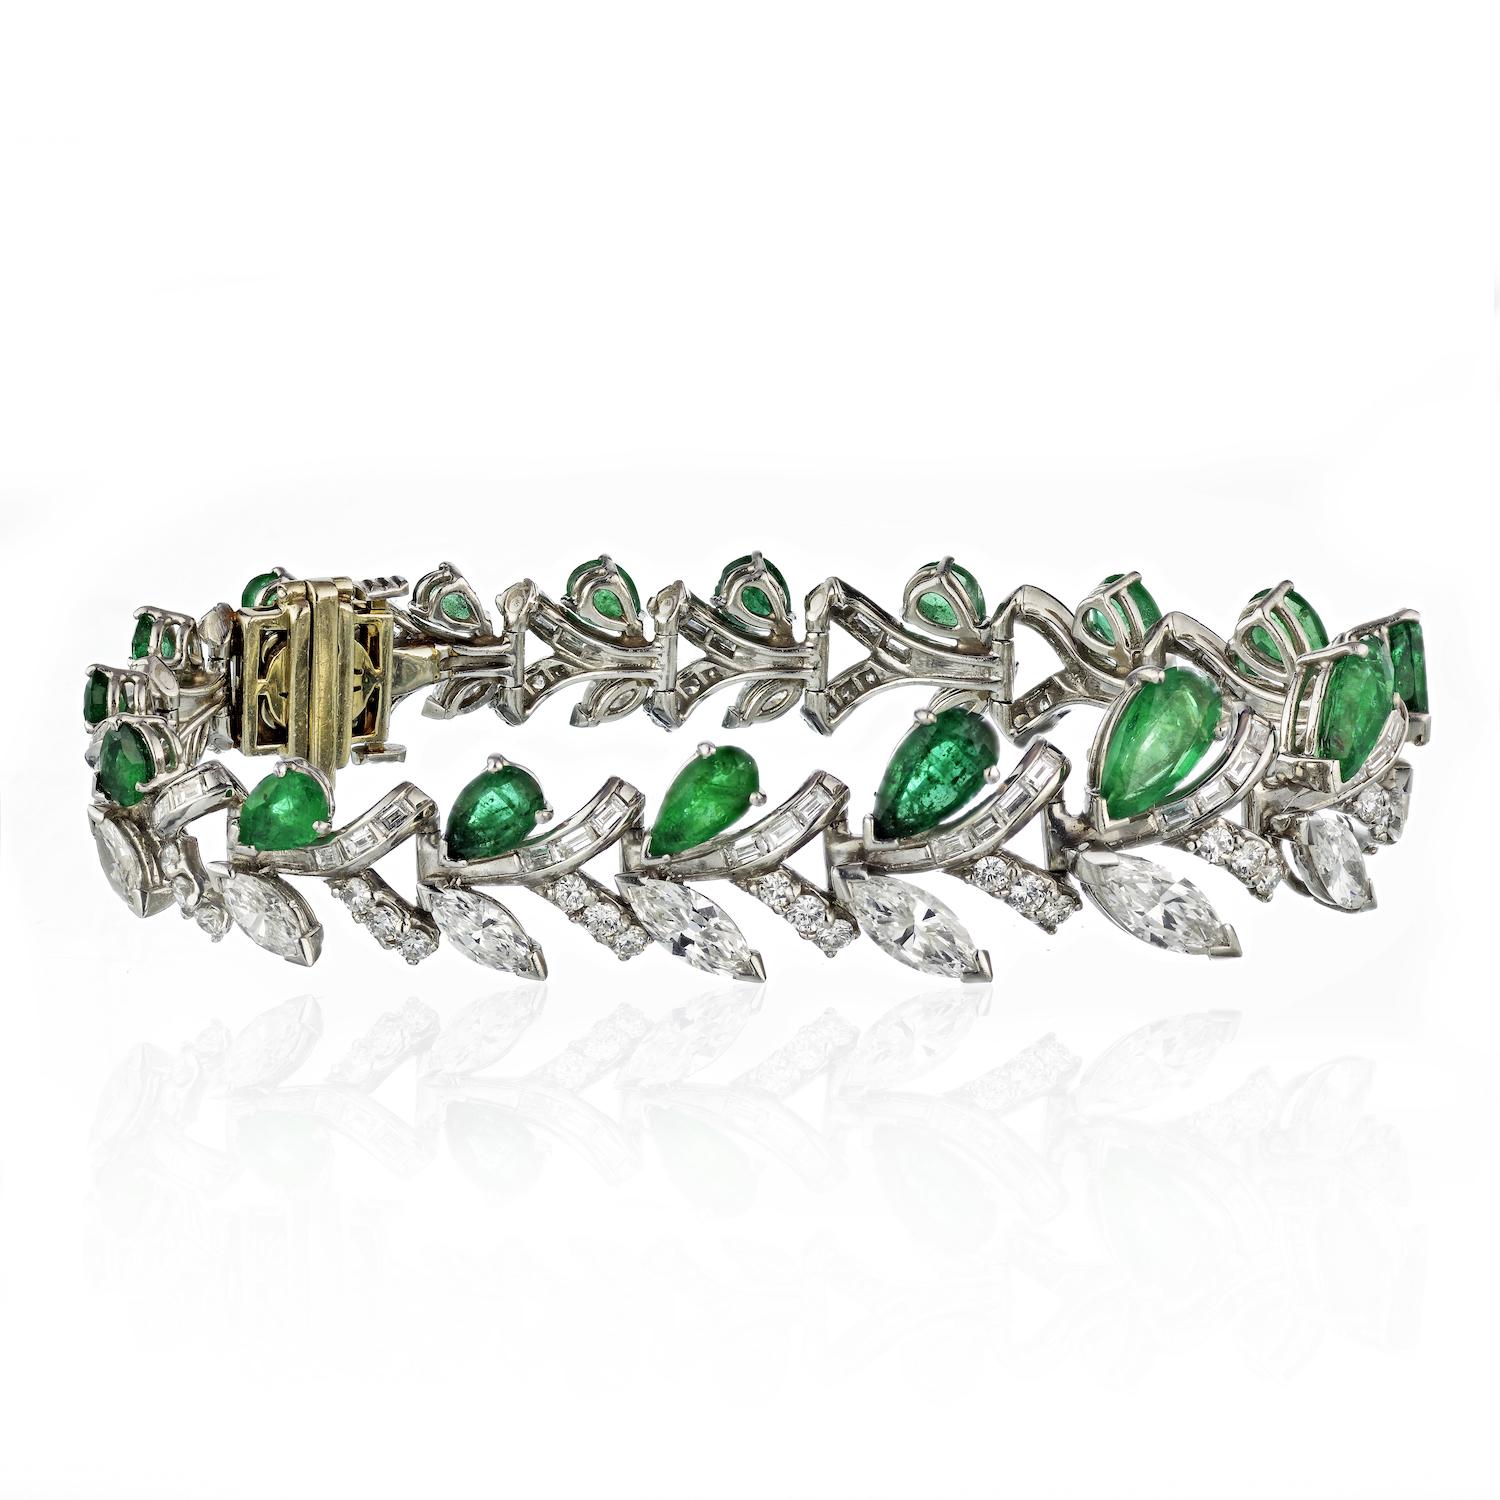 Step into the timeless allure of the 1950s-60s with this exquisite platinum bracelet. A symphony of elegance, it showcases pear-cut green emeralds harmoniously intertwined with 12 carats of brilliant, high-quality diamonds (marquise cuts, baguette